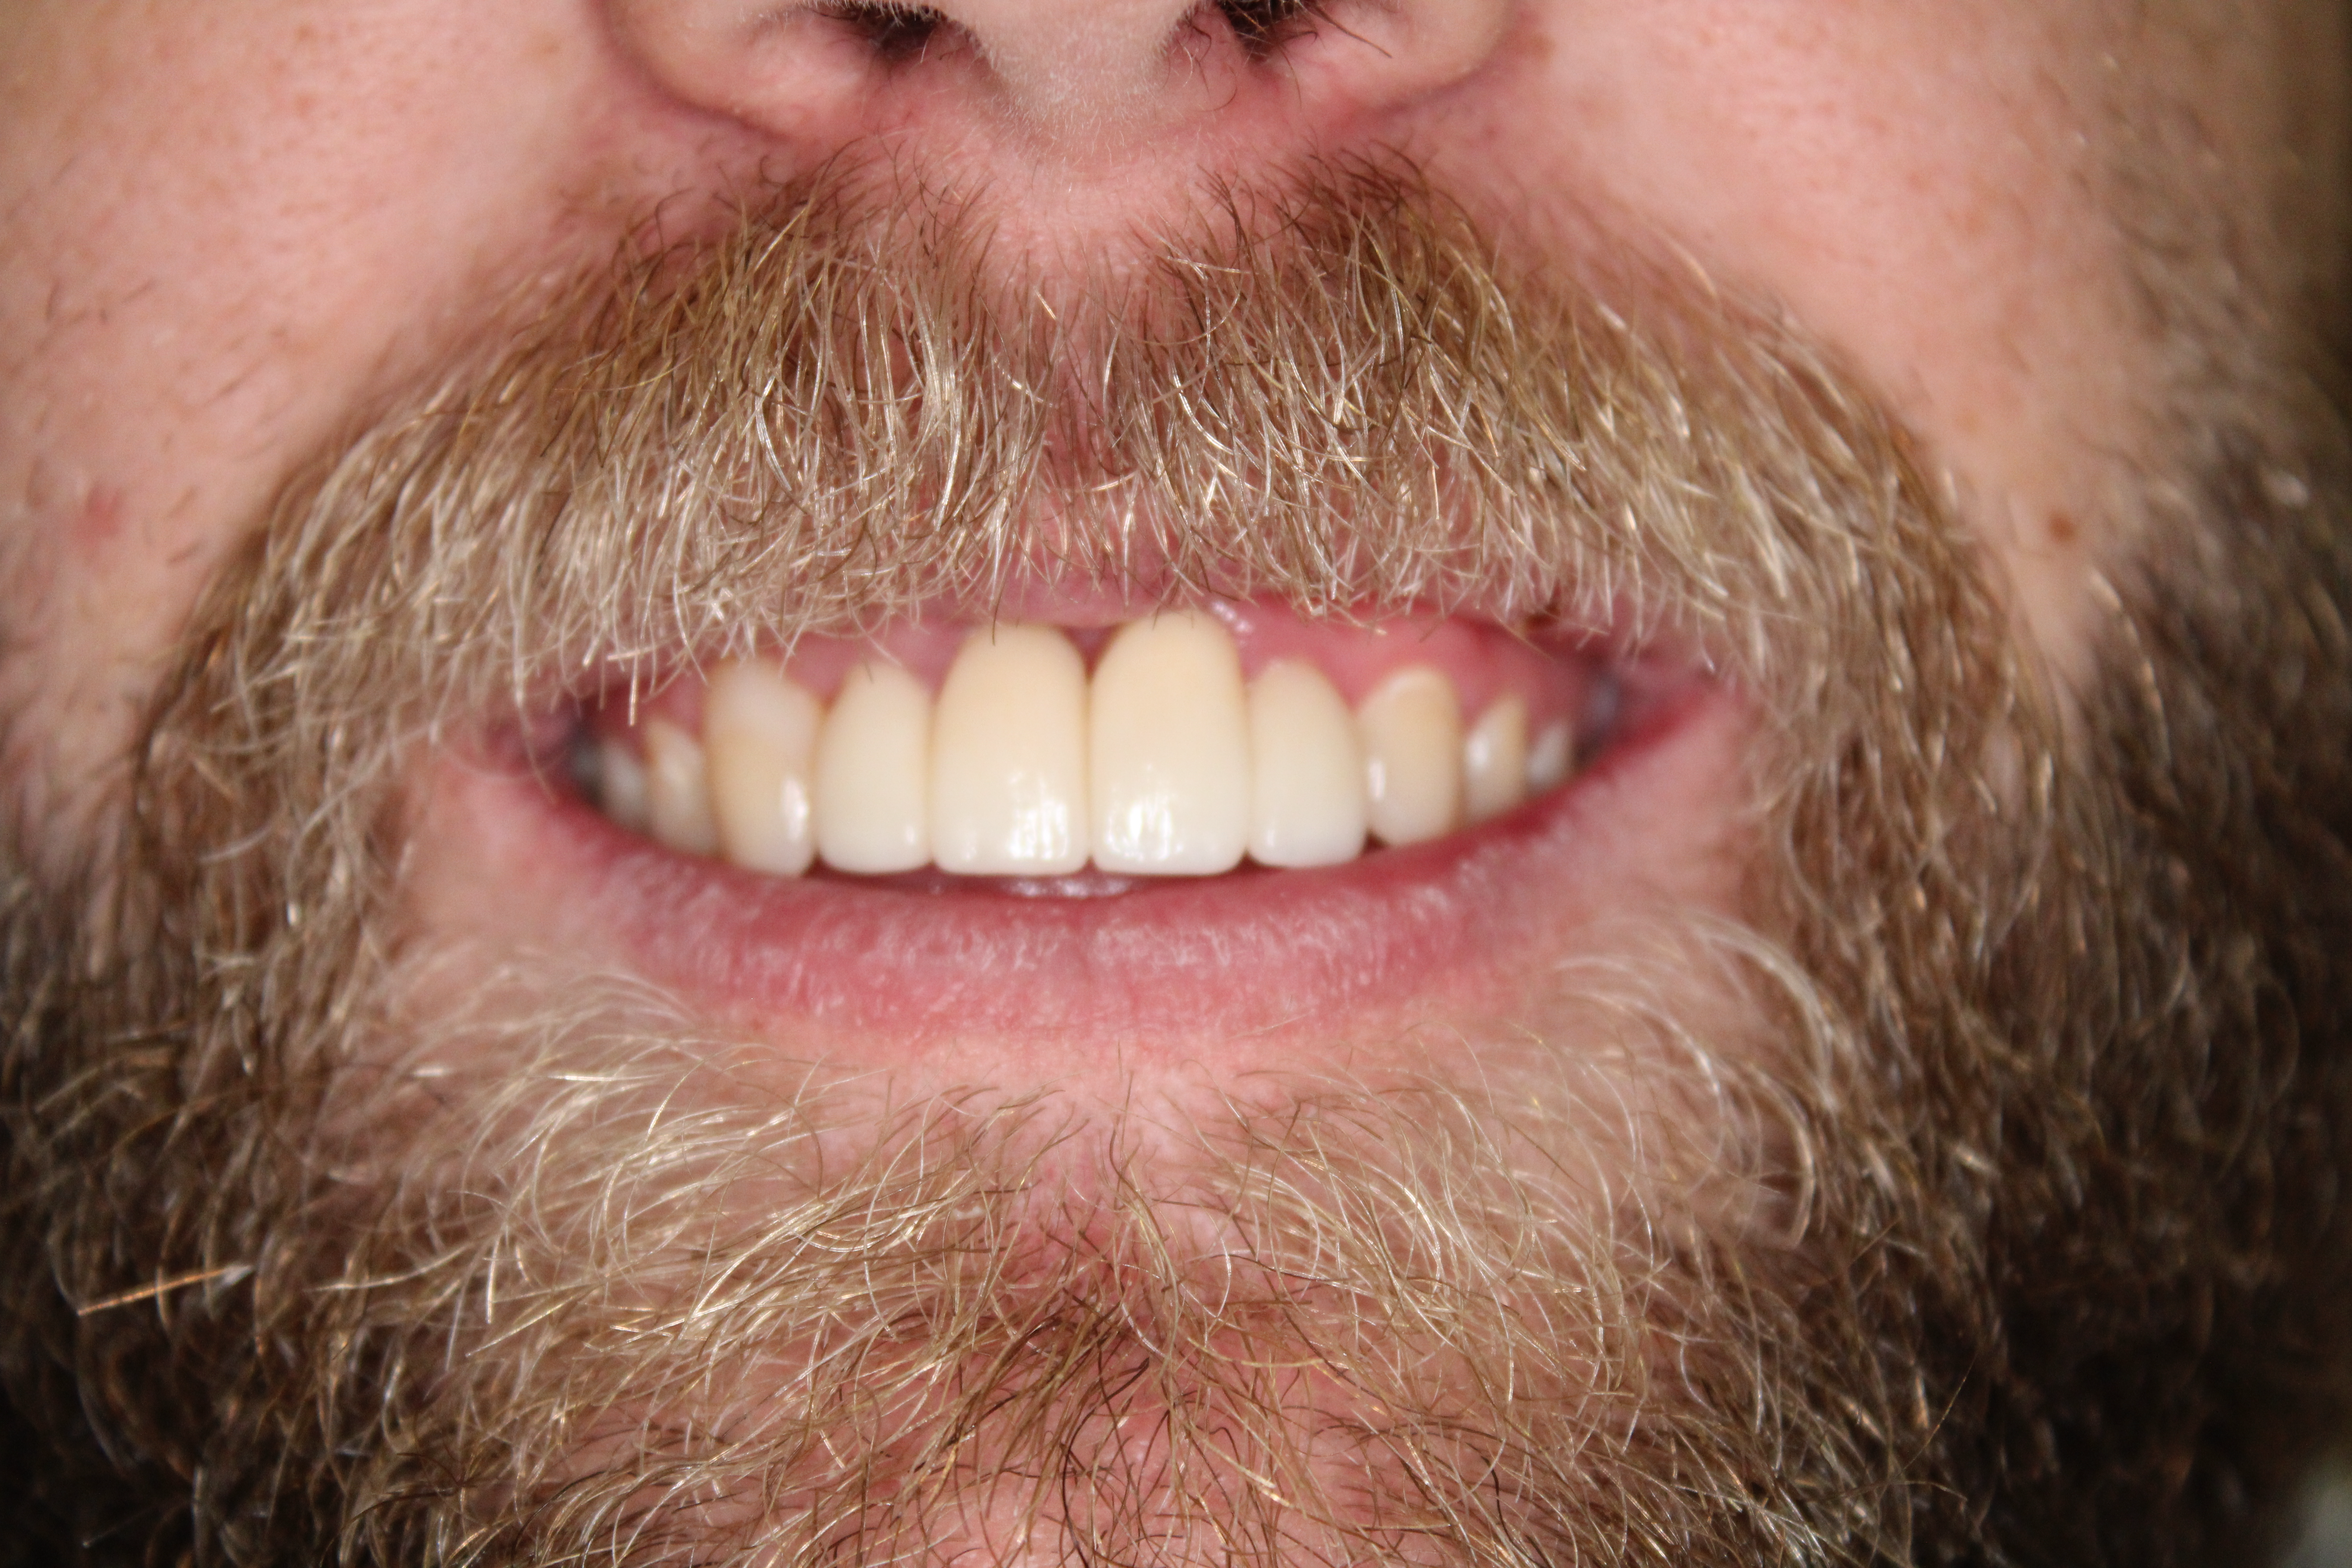 A much-improved smile following a treatment with dental crowns.